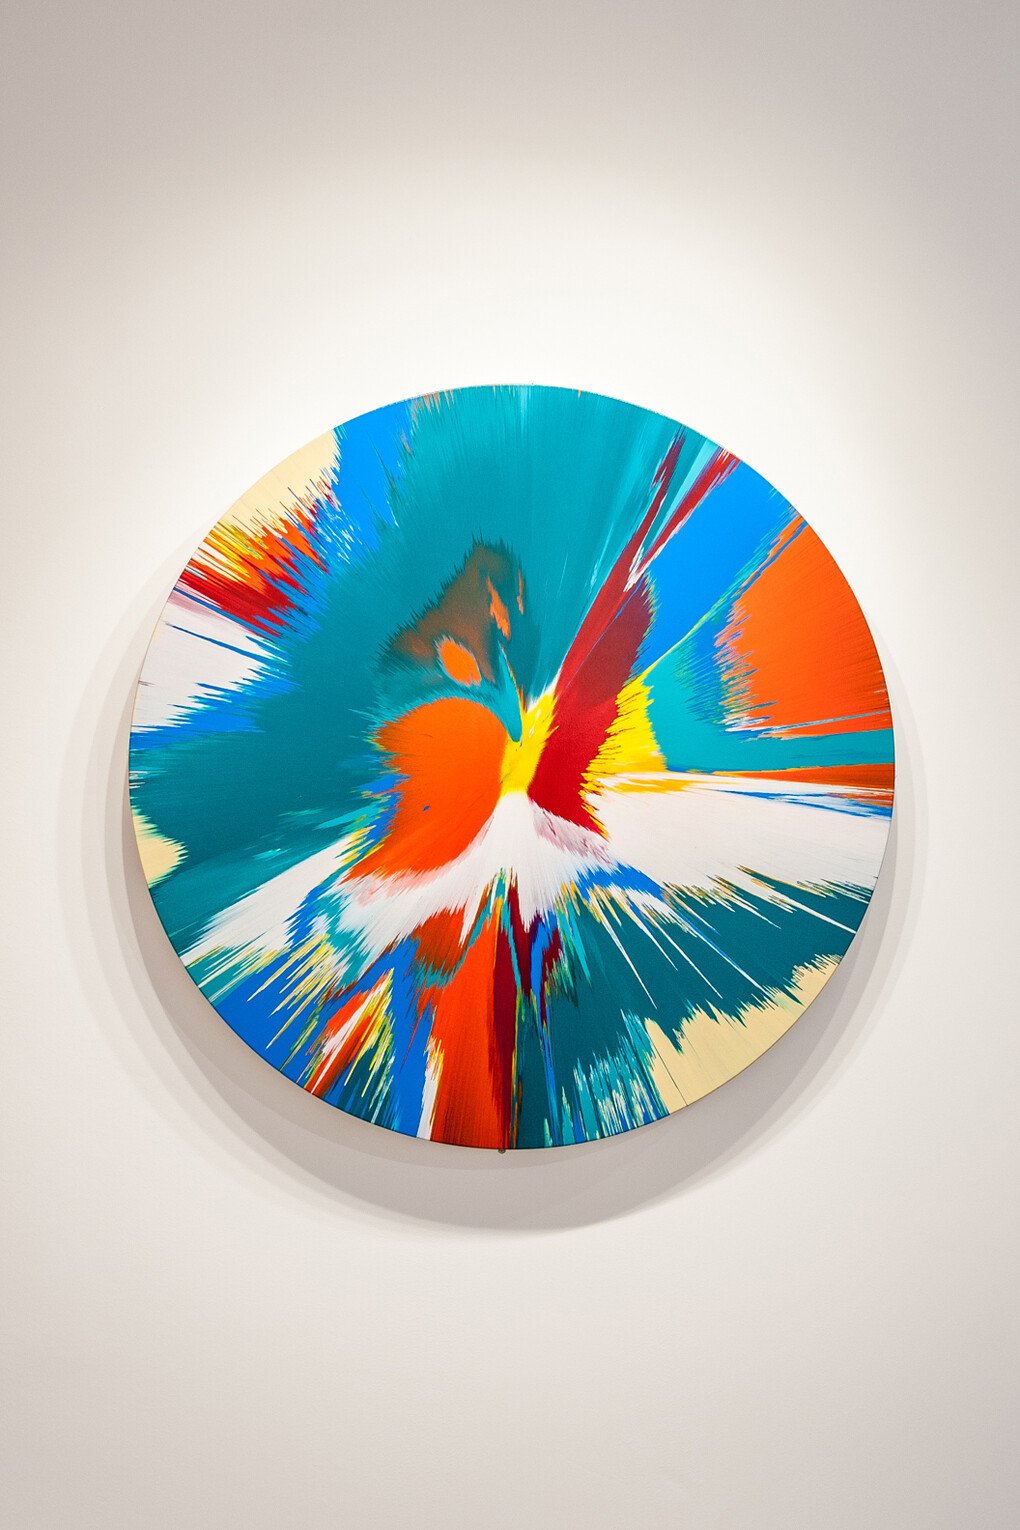 2013_SHOCK_OF_THE_NEW_MEAD_CARNEY_PORTO_MONTENEGRO_Damien-Hirst-Beautiful-Primal-Urges-Painting-2008-Household-Gloss-on-Canvas-60-in-1524-mm.jpg